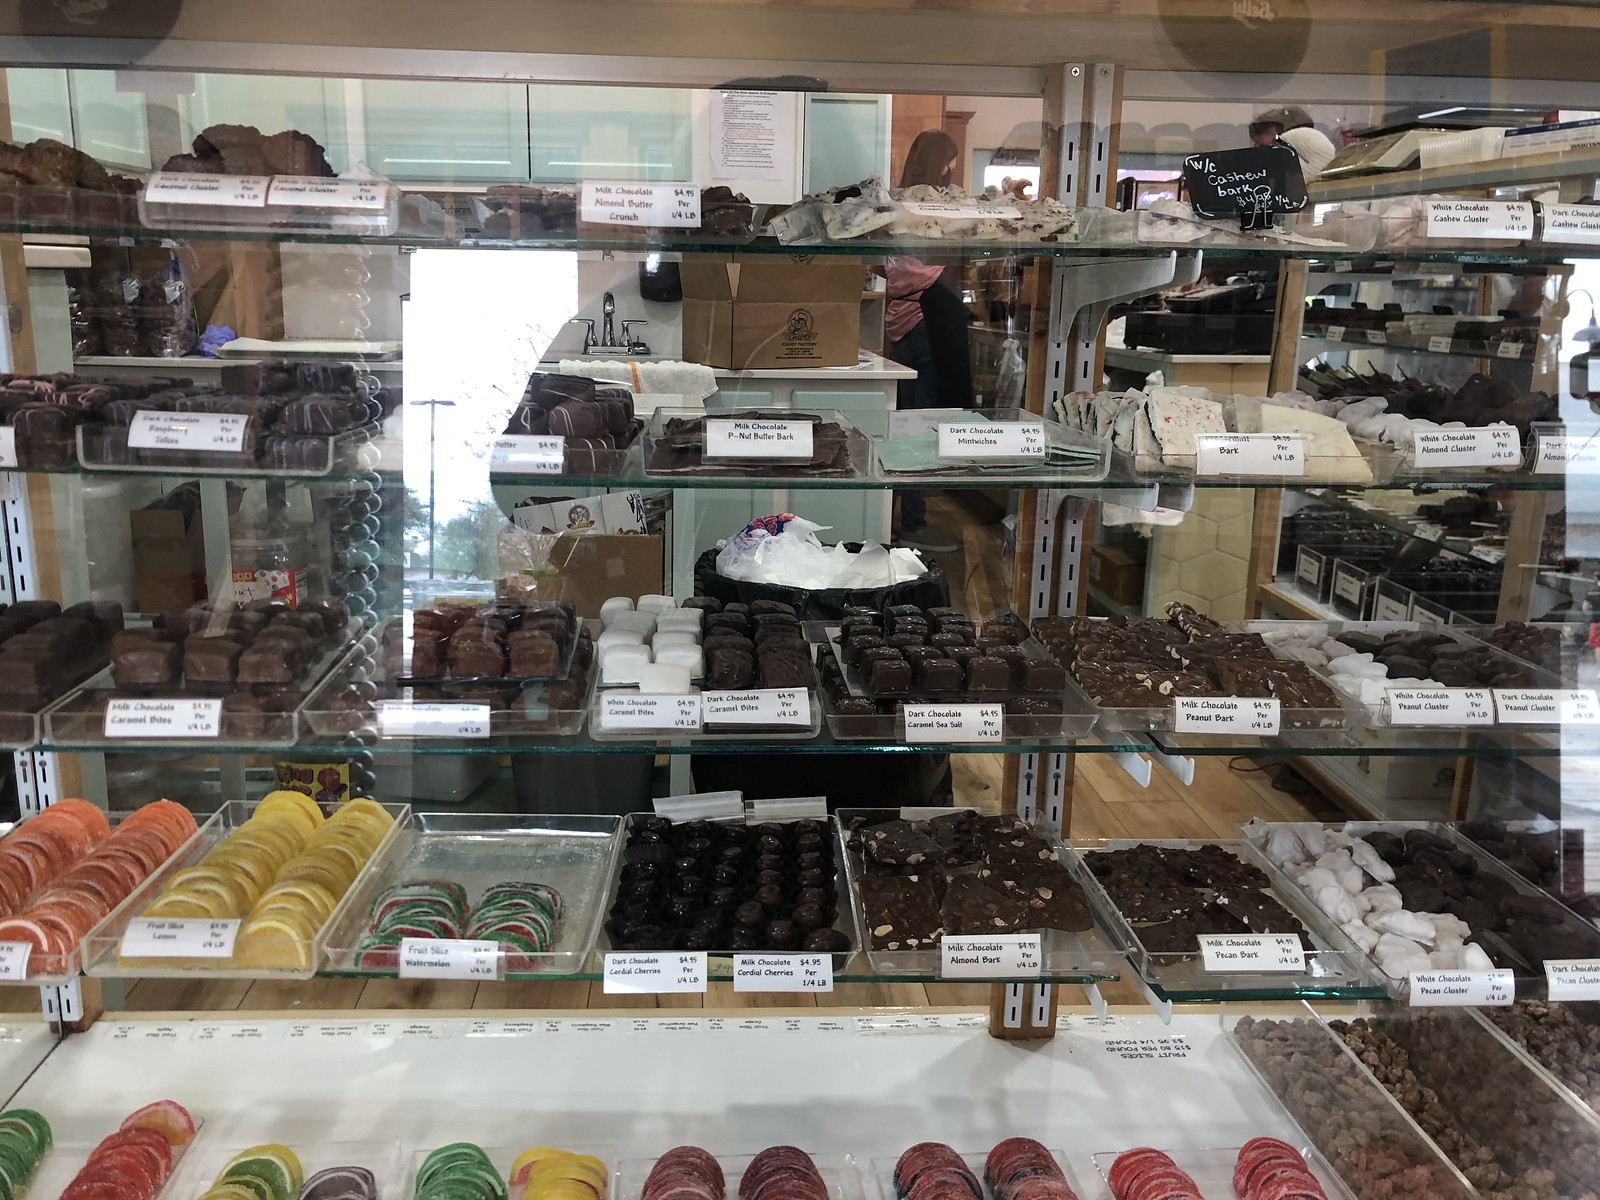 Barefoot landing - wee r sweets, spices, fudge, olives. Pepper palace